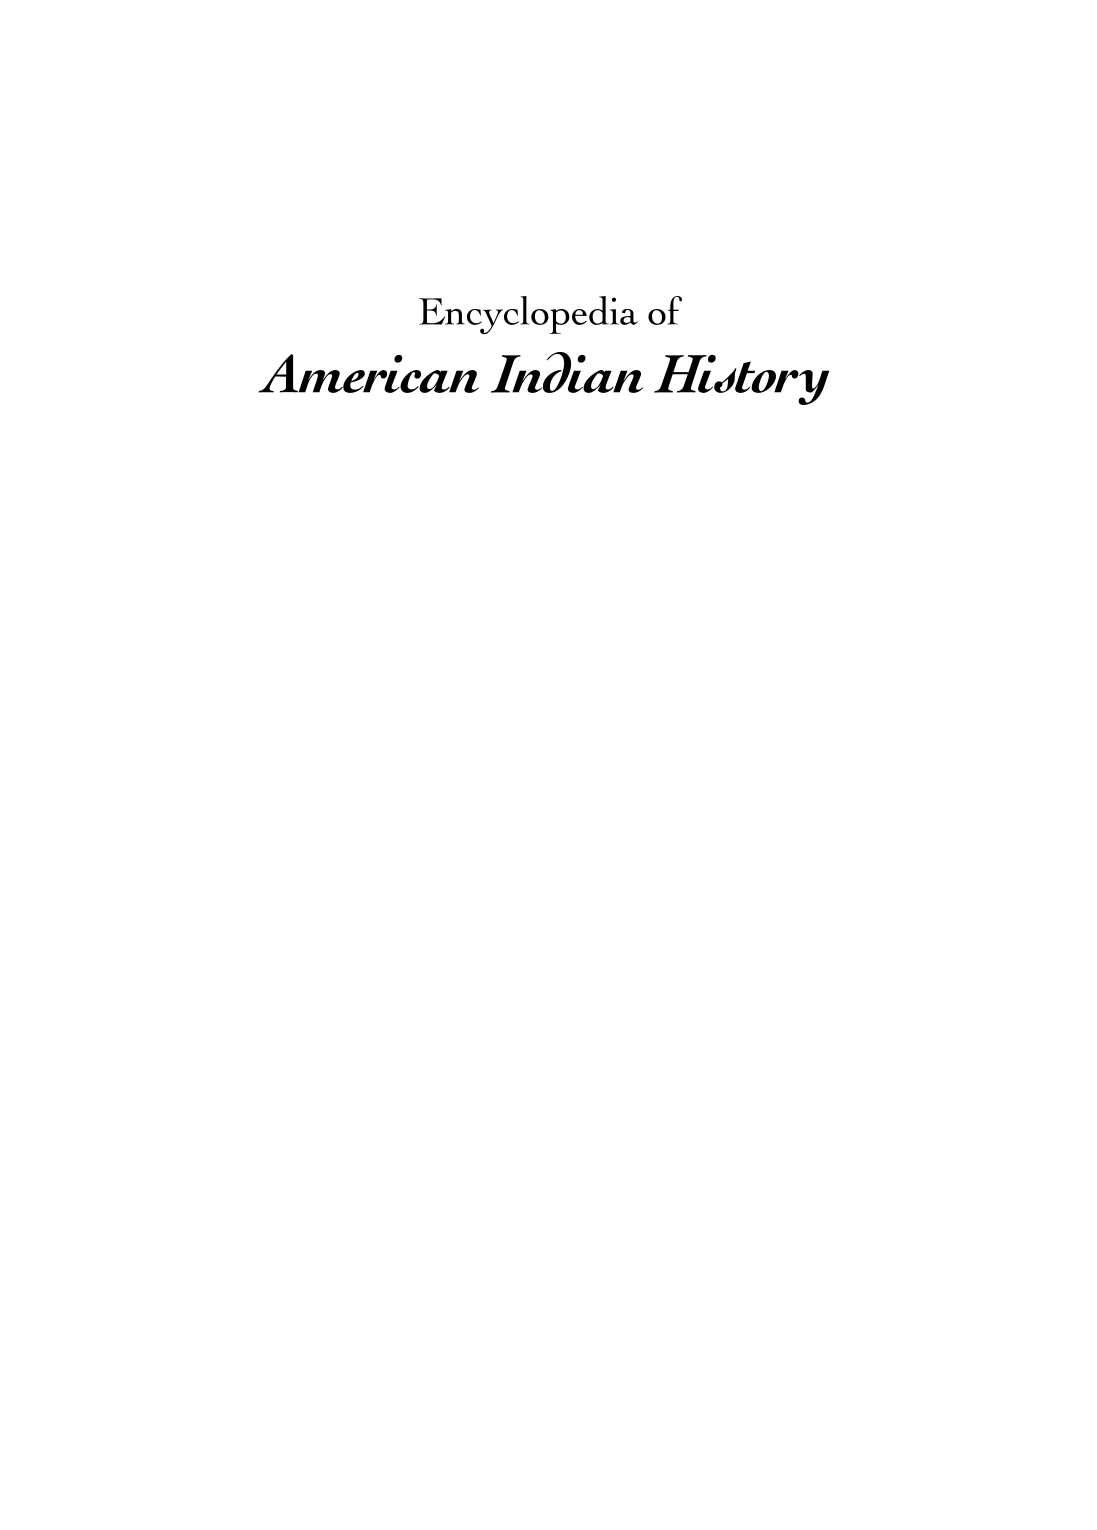 Encyclopedia of American Indian History [4 volumes] page i